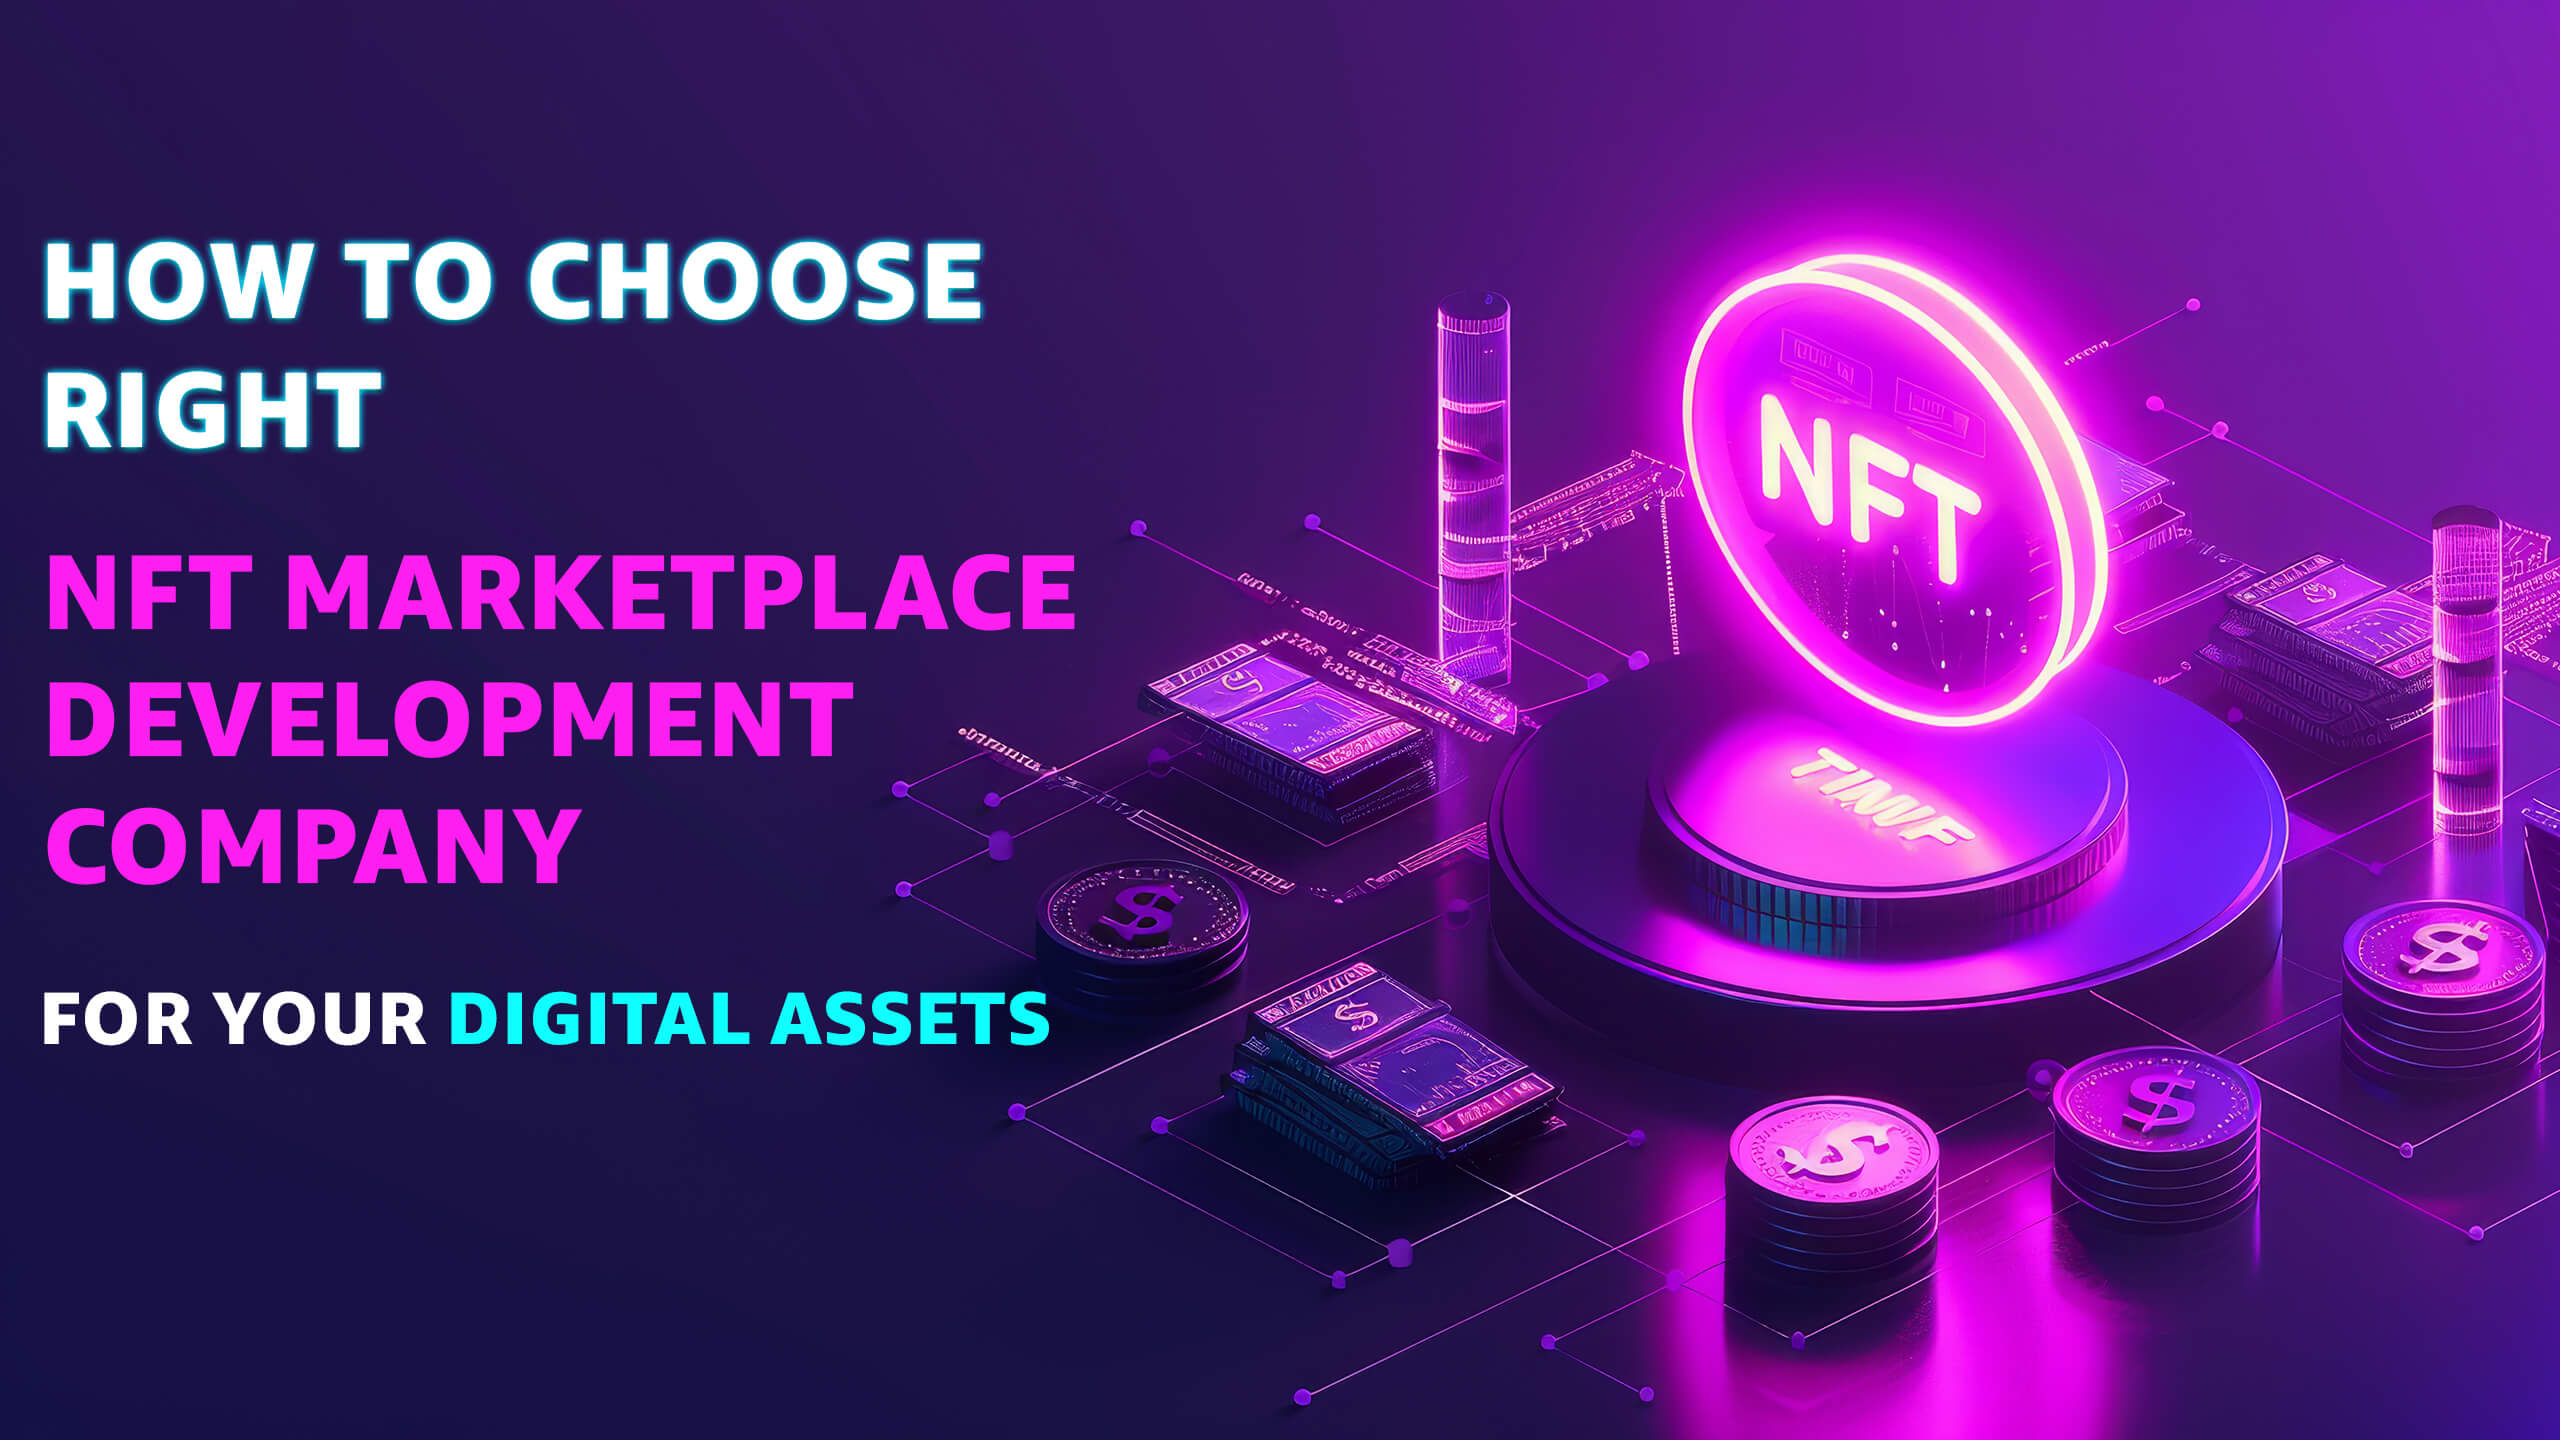 How to Choose Right NFT Marketplace Development Company